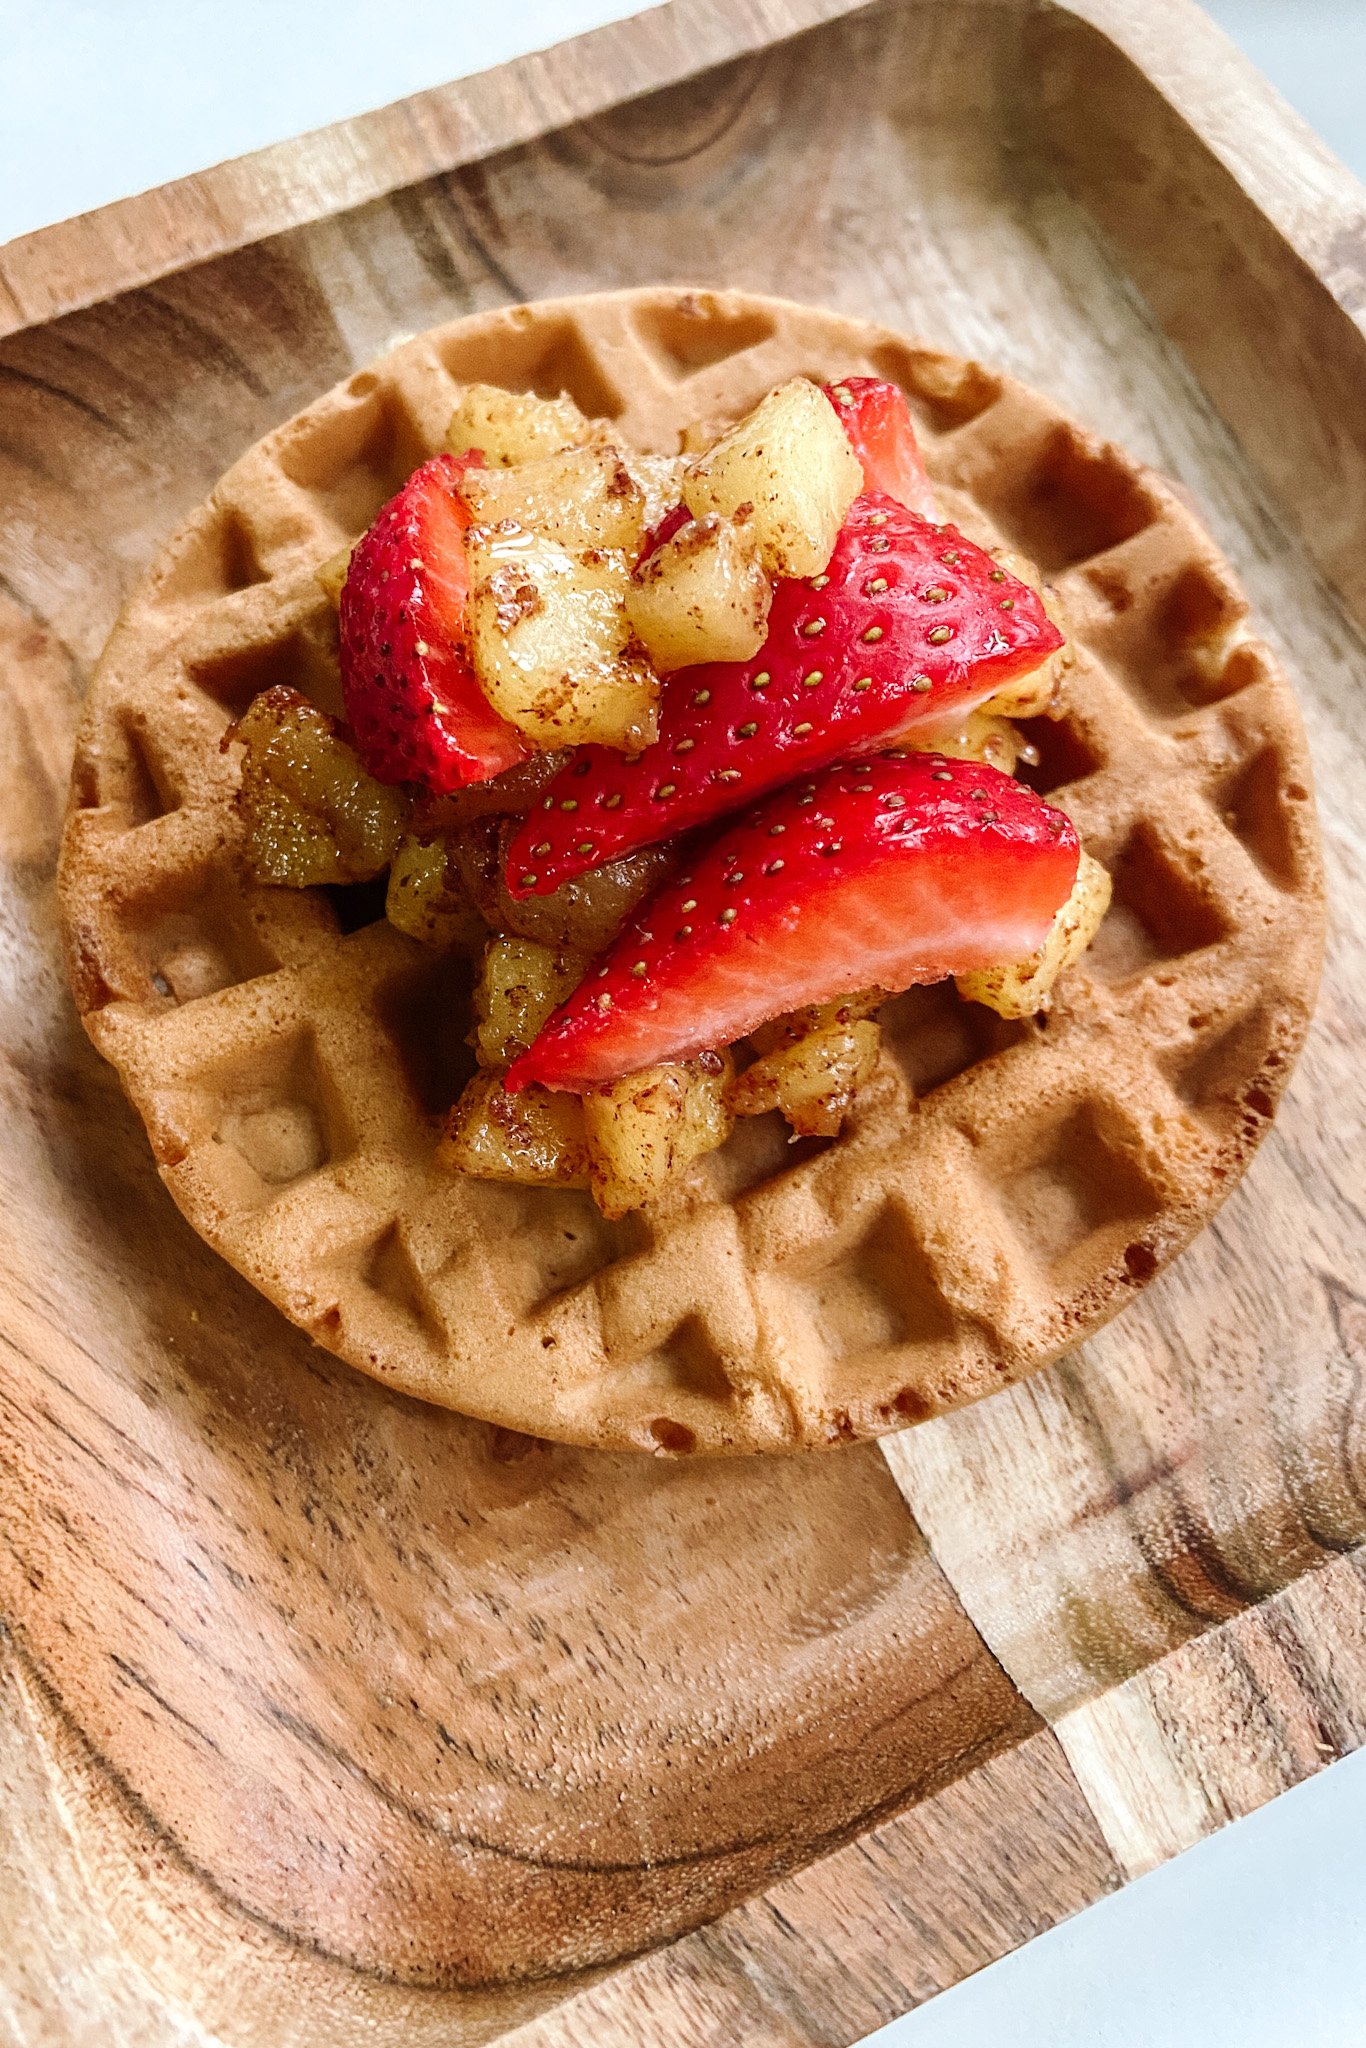 Cinnamon apple waffle topped with cinnamon apples and sliced strawberries.